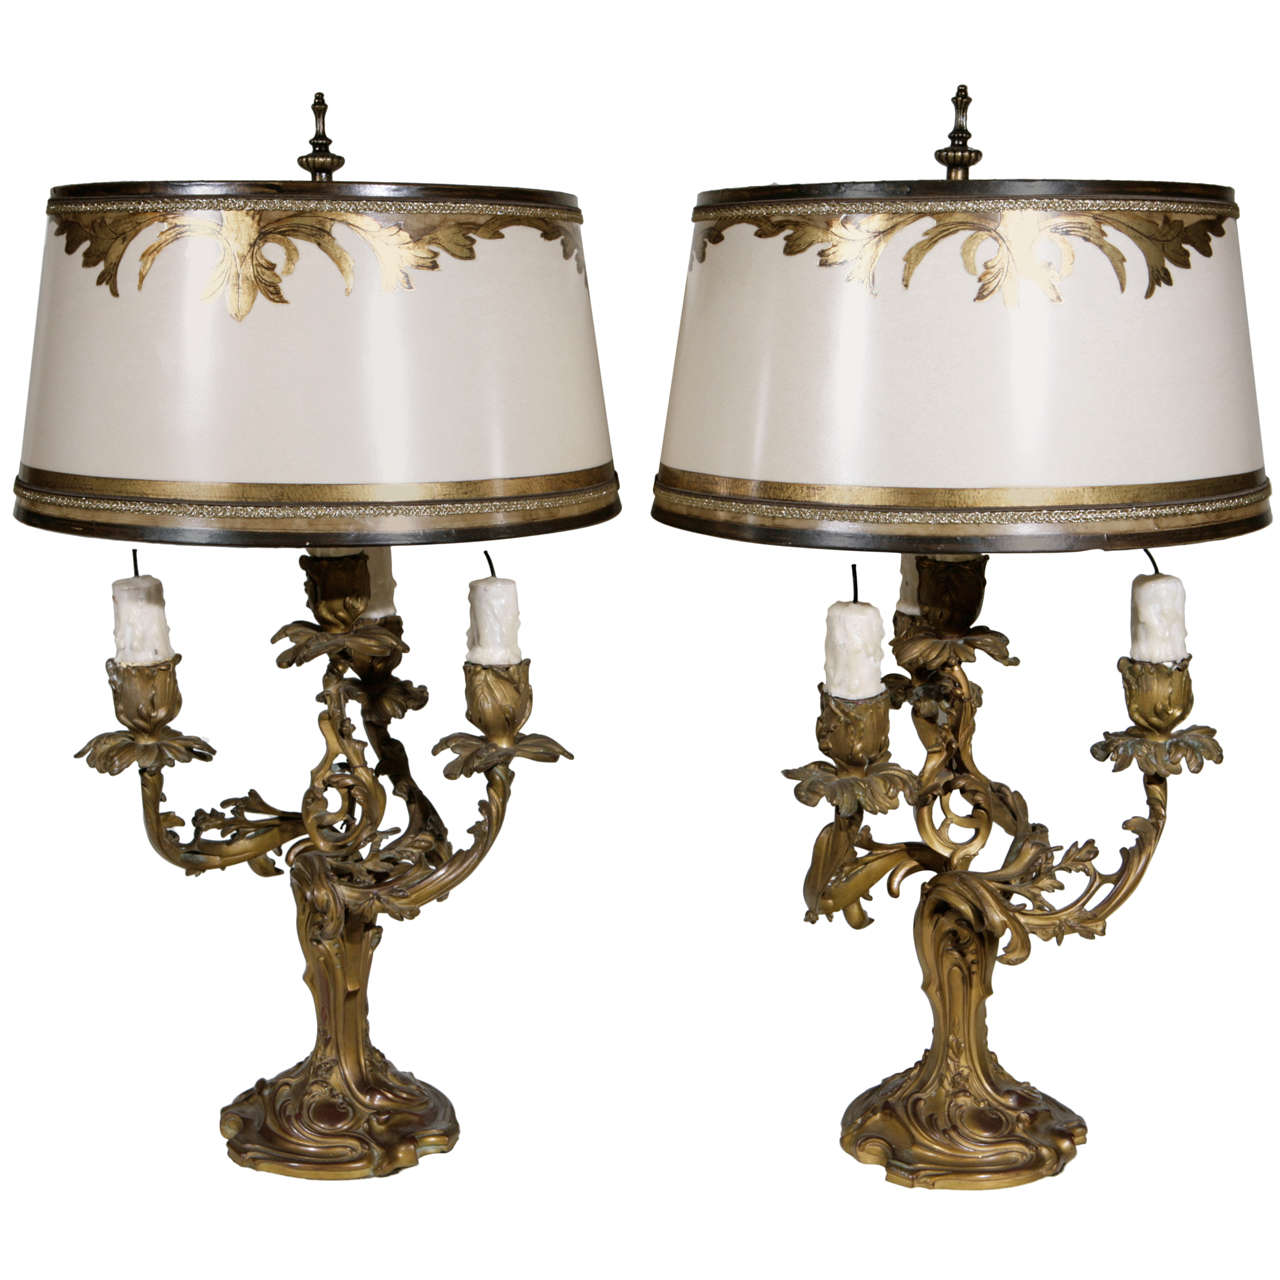 Pair of 19th c. French 3 Arm Dore Bronze Candelabra Lamps For Sale